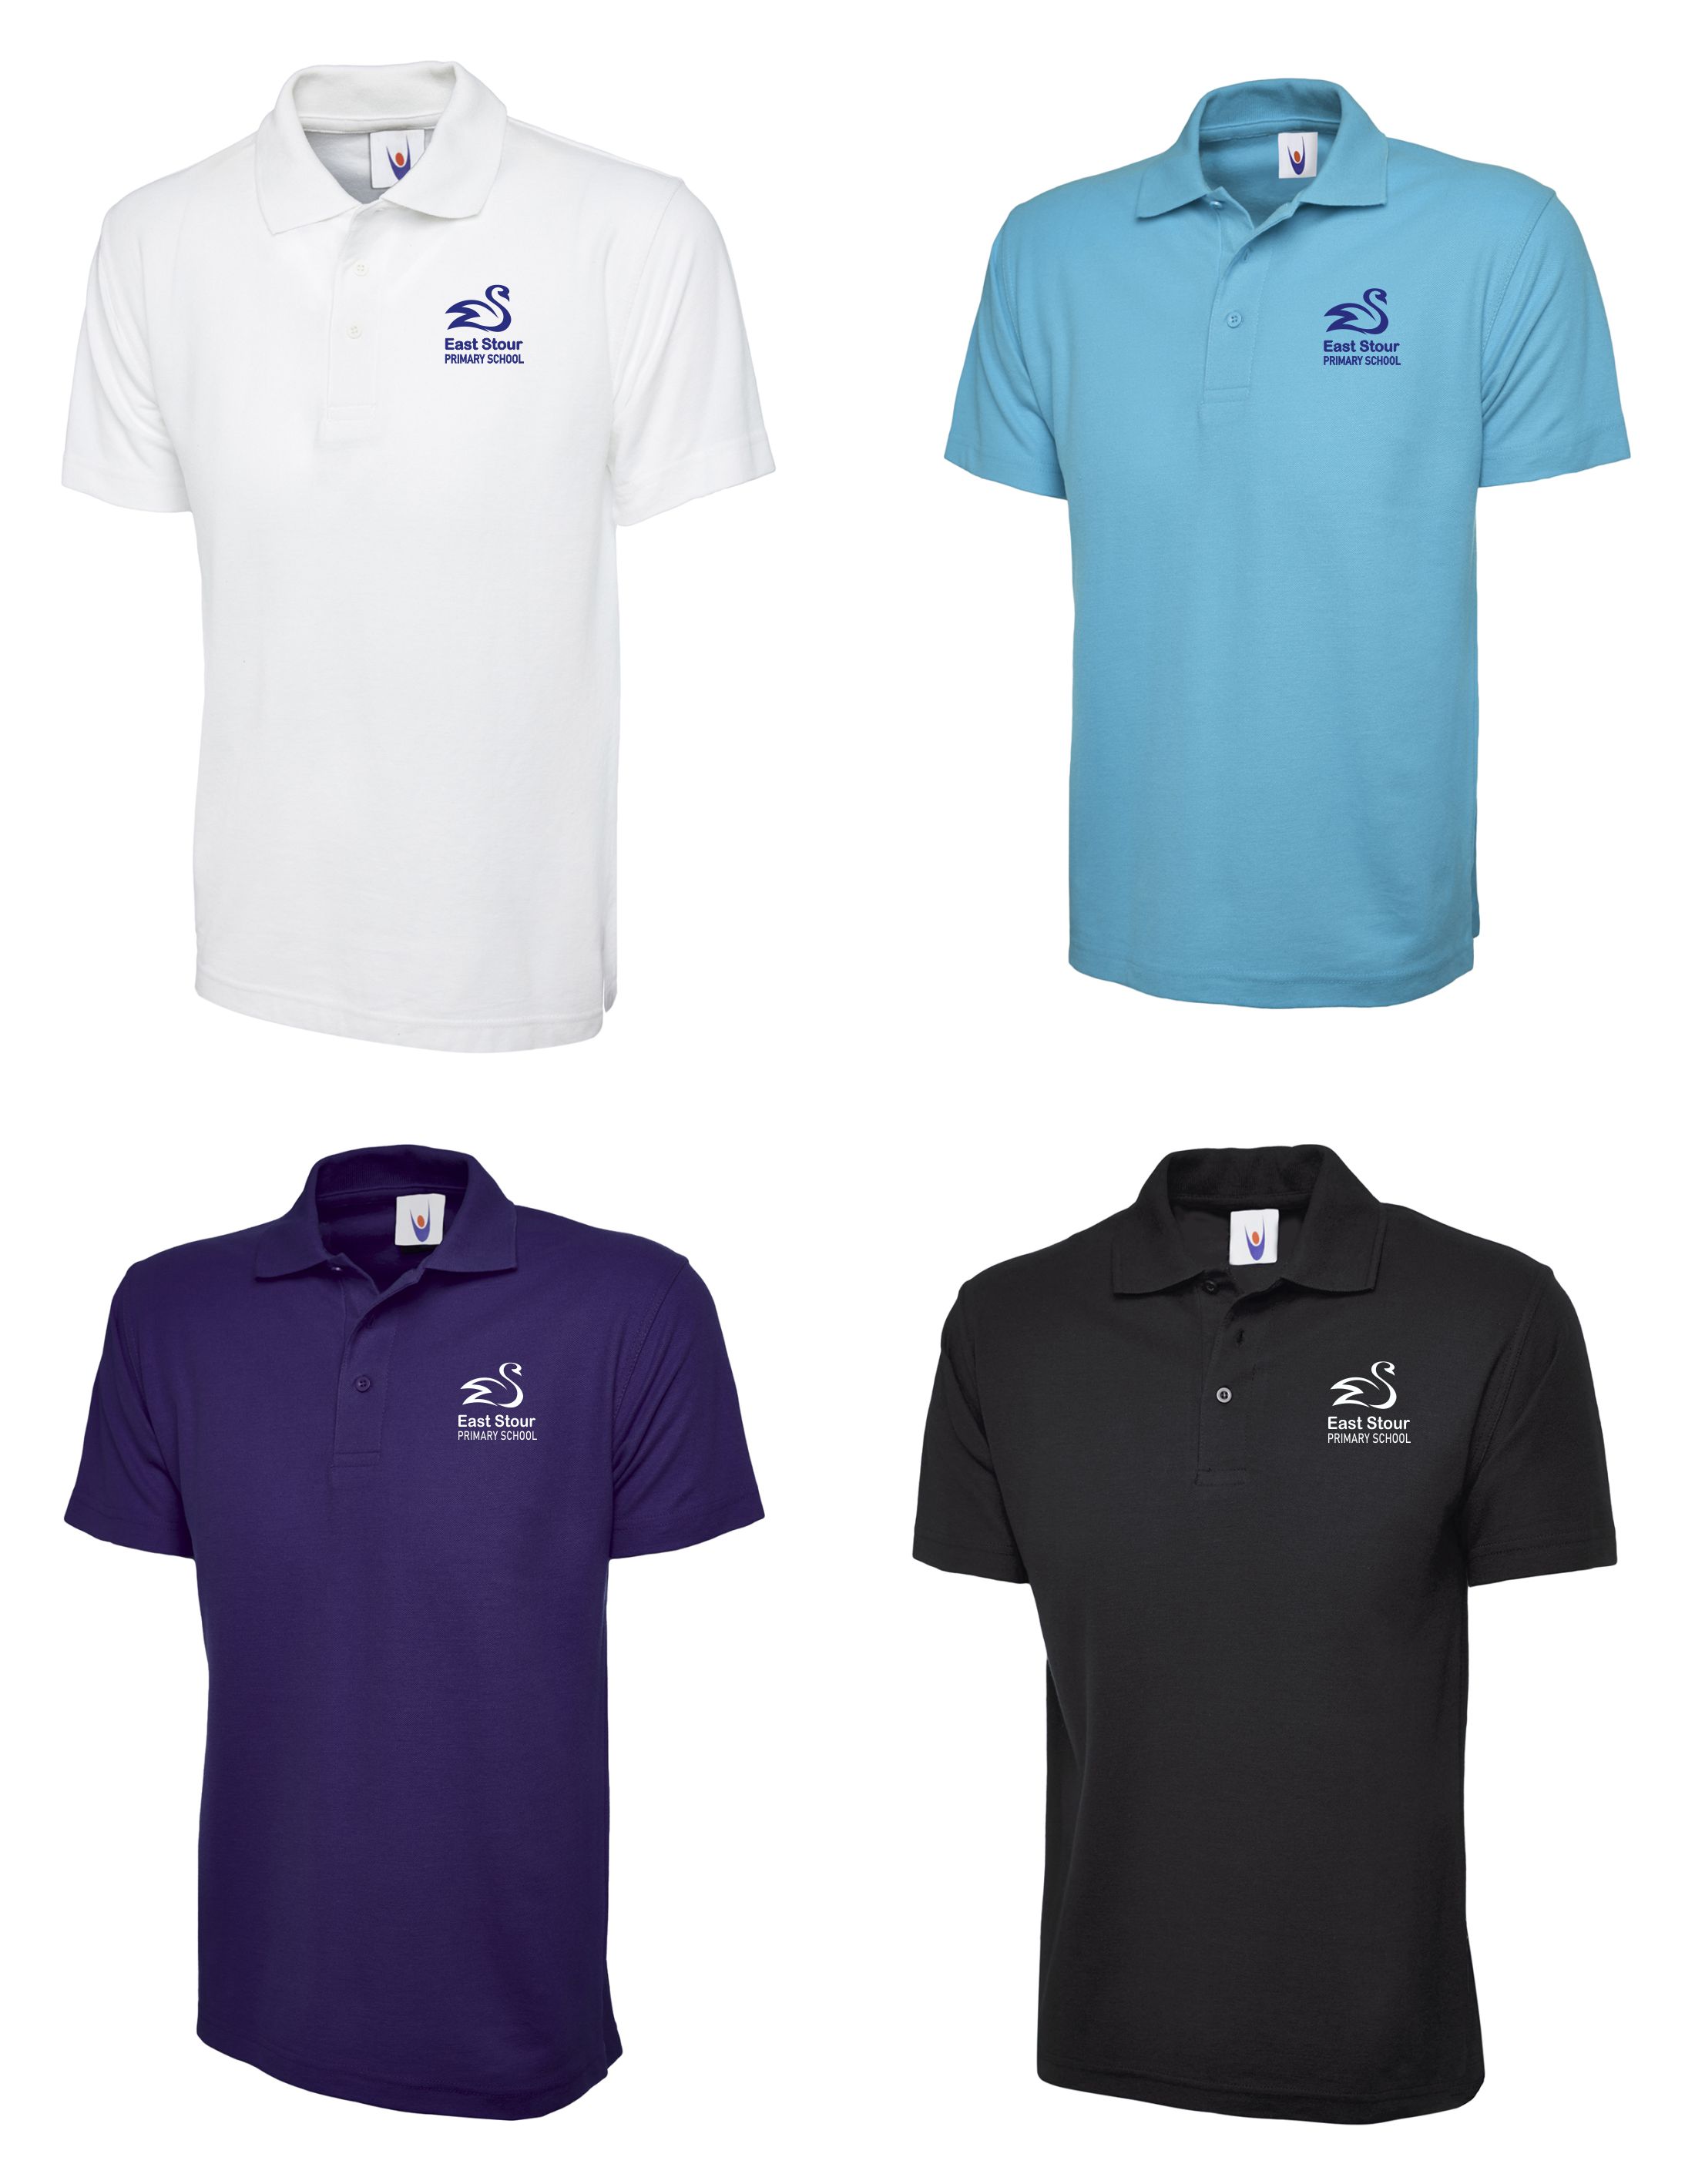 EAST STOUR STAFF POLO - Ambition Sport